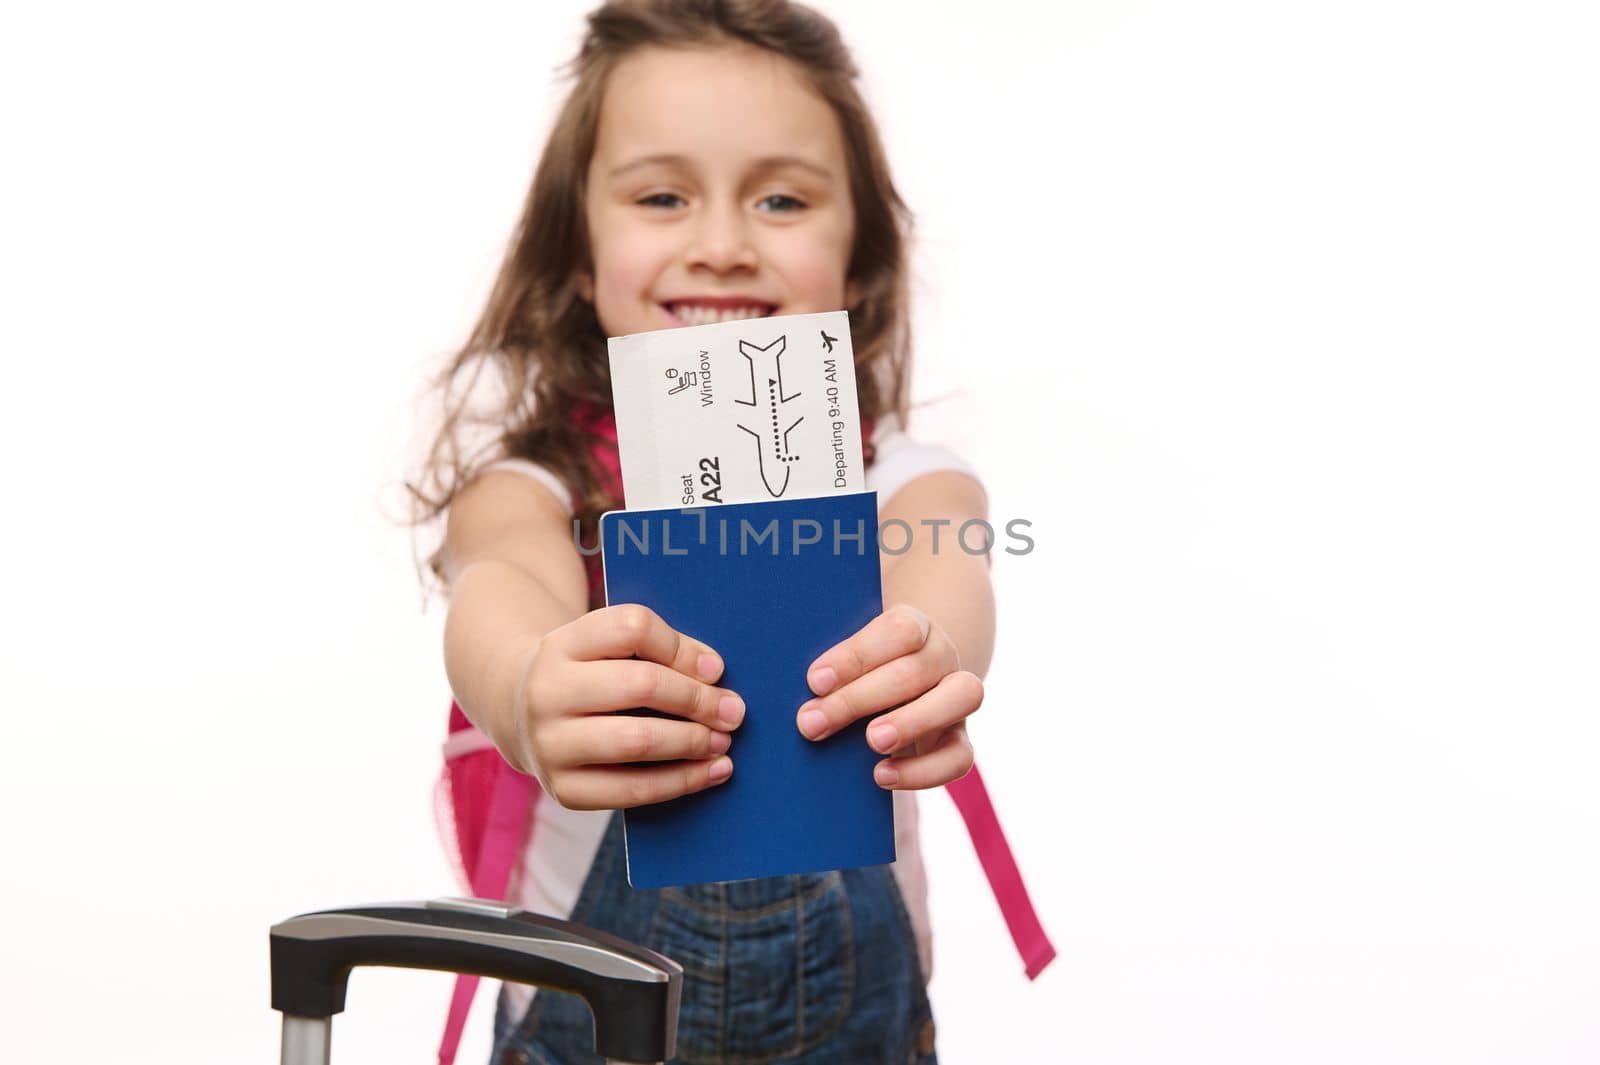 Selective focus on boarding pass, flight ticket in the hands of a blurred cute baby girl, isolated over white background by artgf